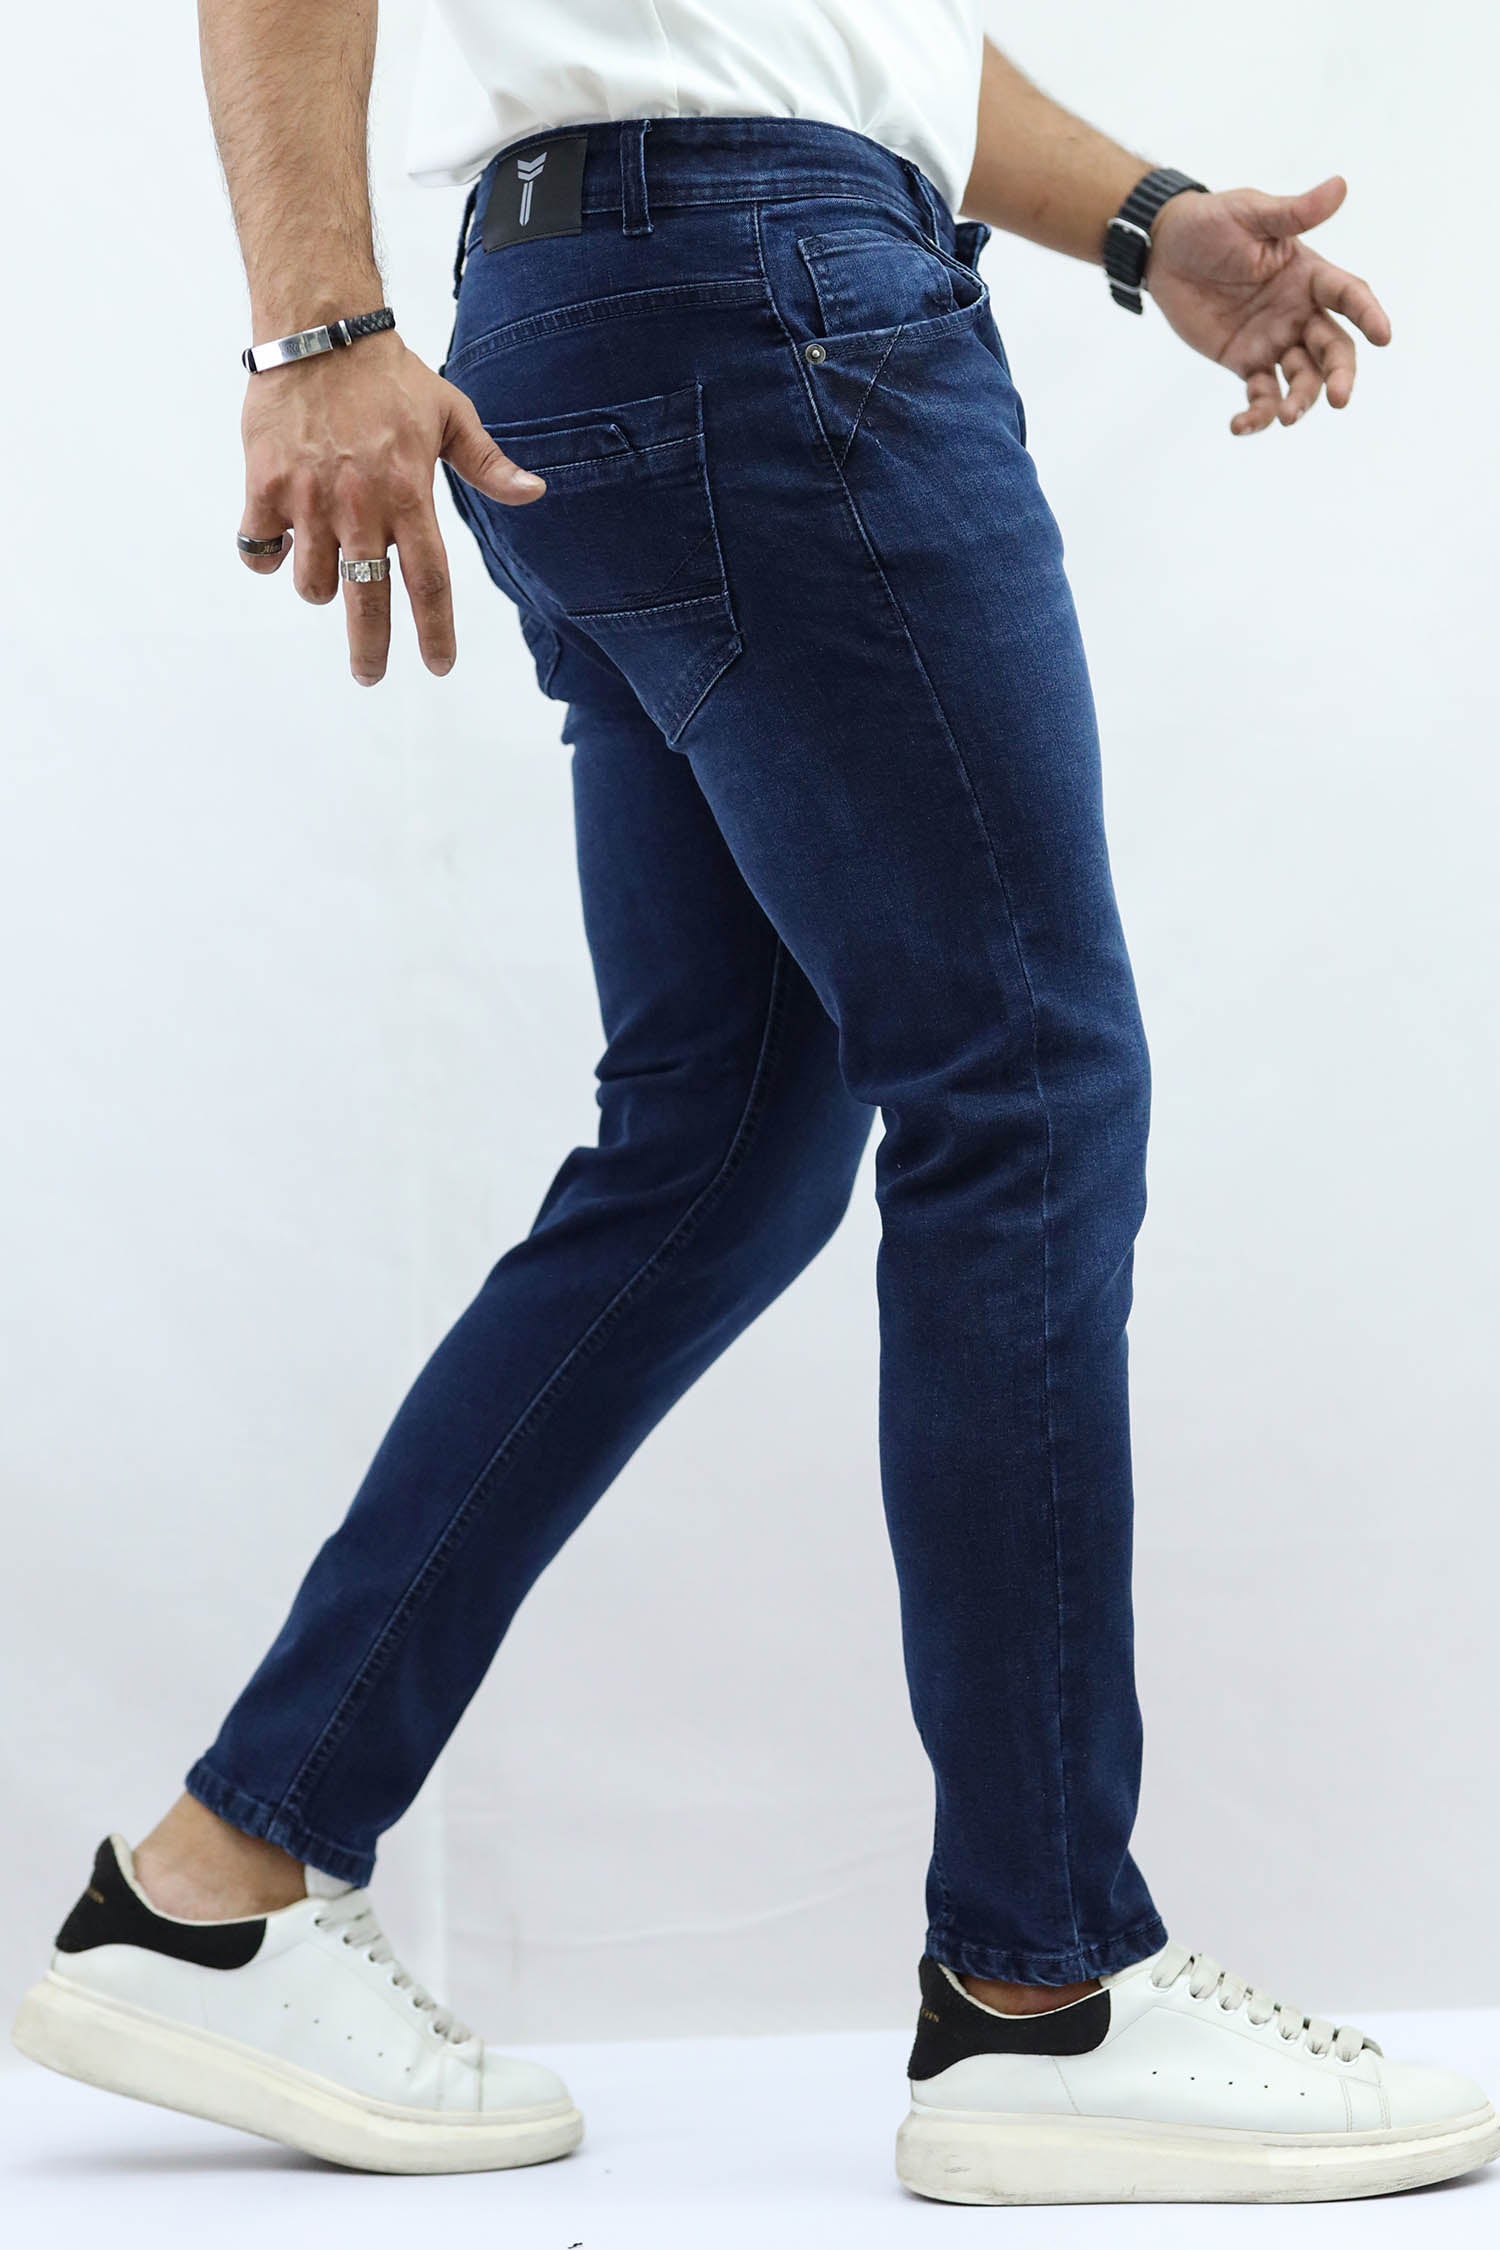 Turbo Ankle Fit Jeans In Navy Blue